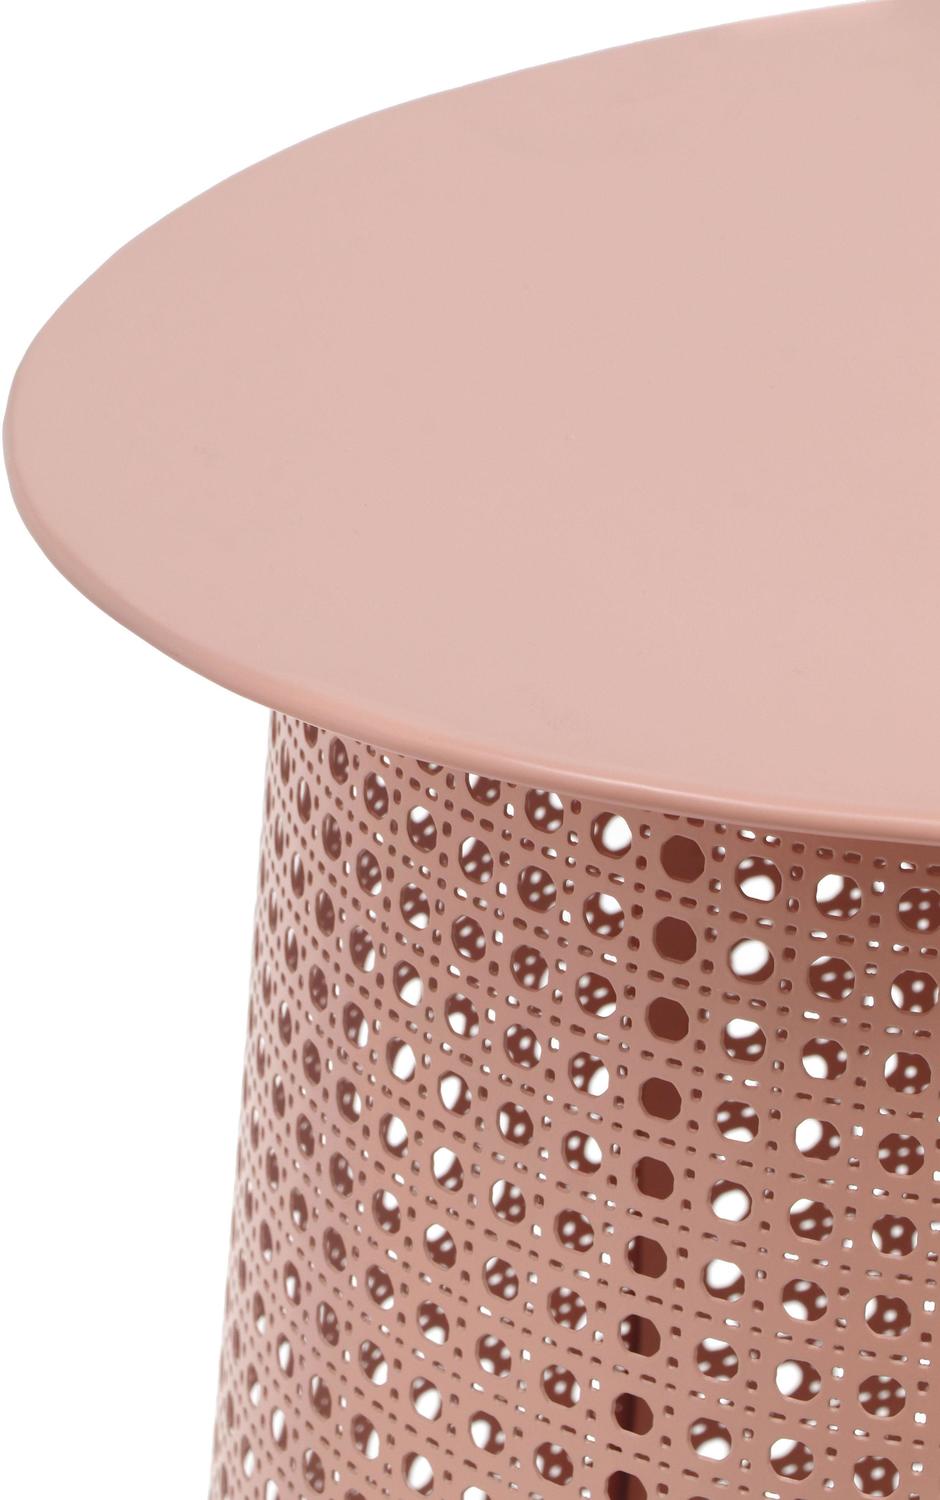 natural coffee table Contemporary Design Furniture Side Tables Pink